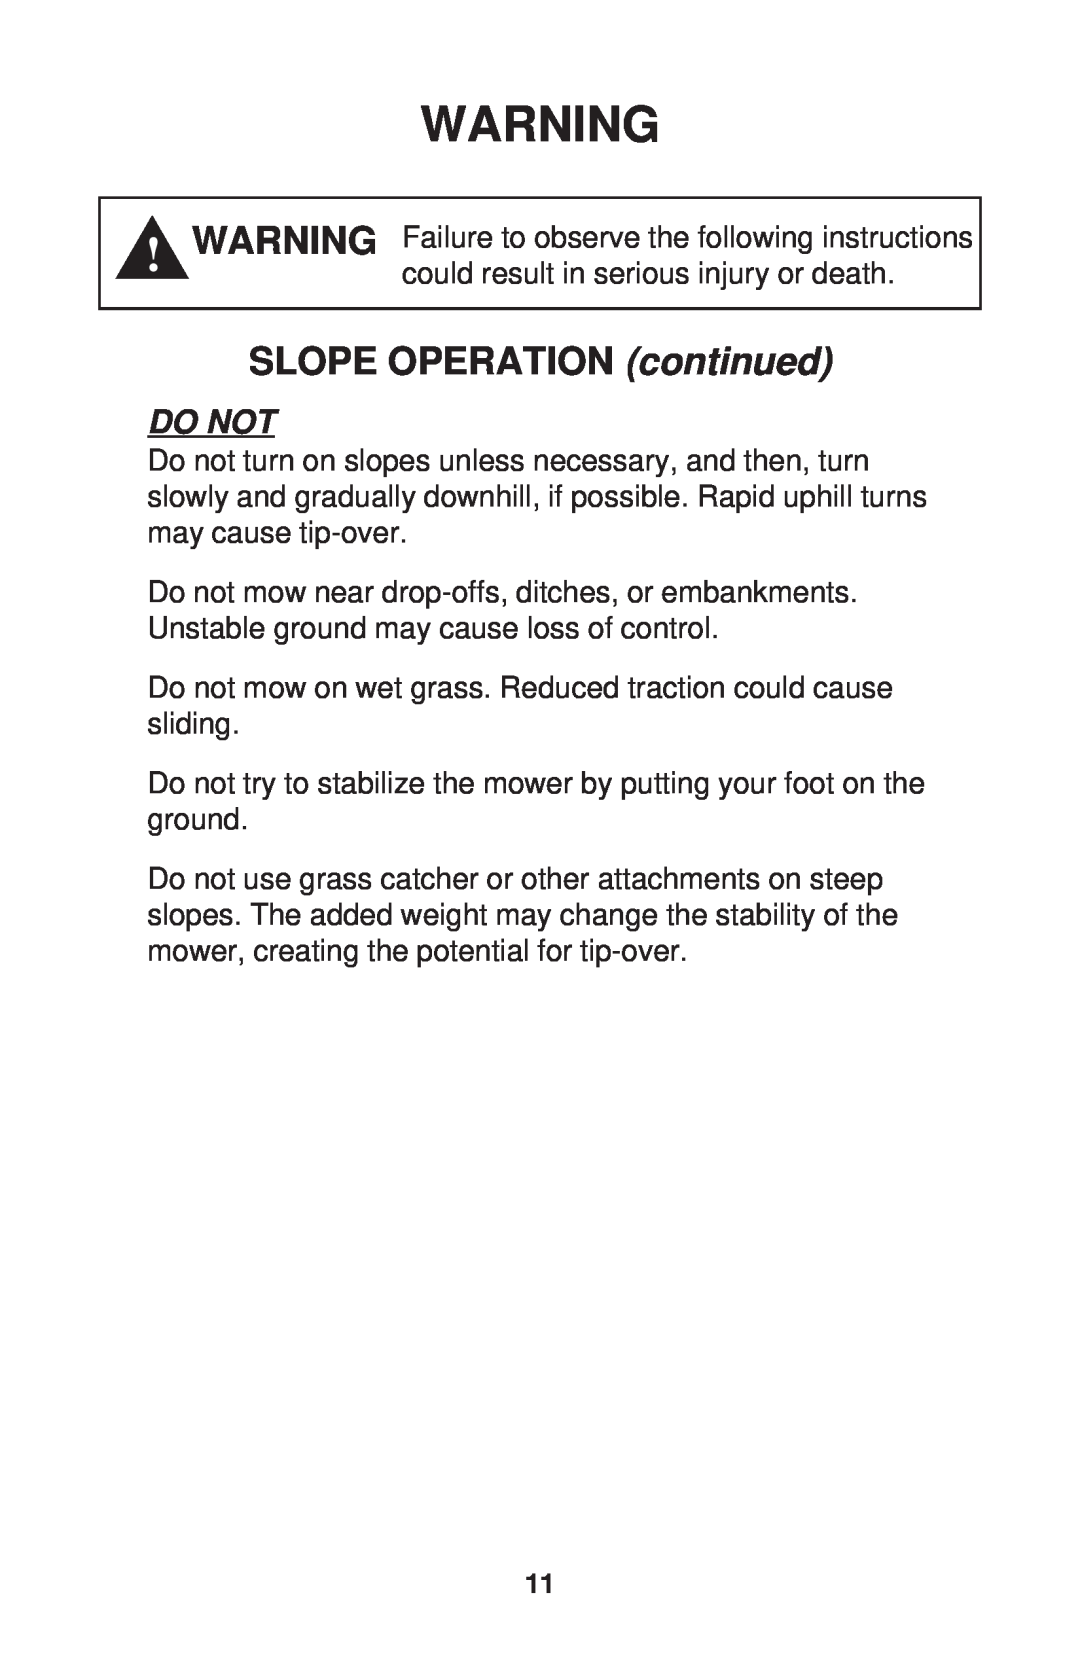 Dixon RAM 44, BS, BS, HON, KOH, KAW, HON manual SLOPE OPERATION continued, Do Not 